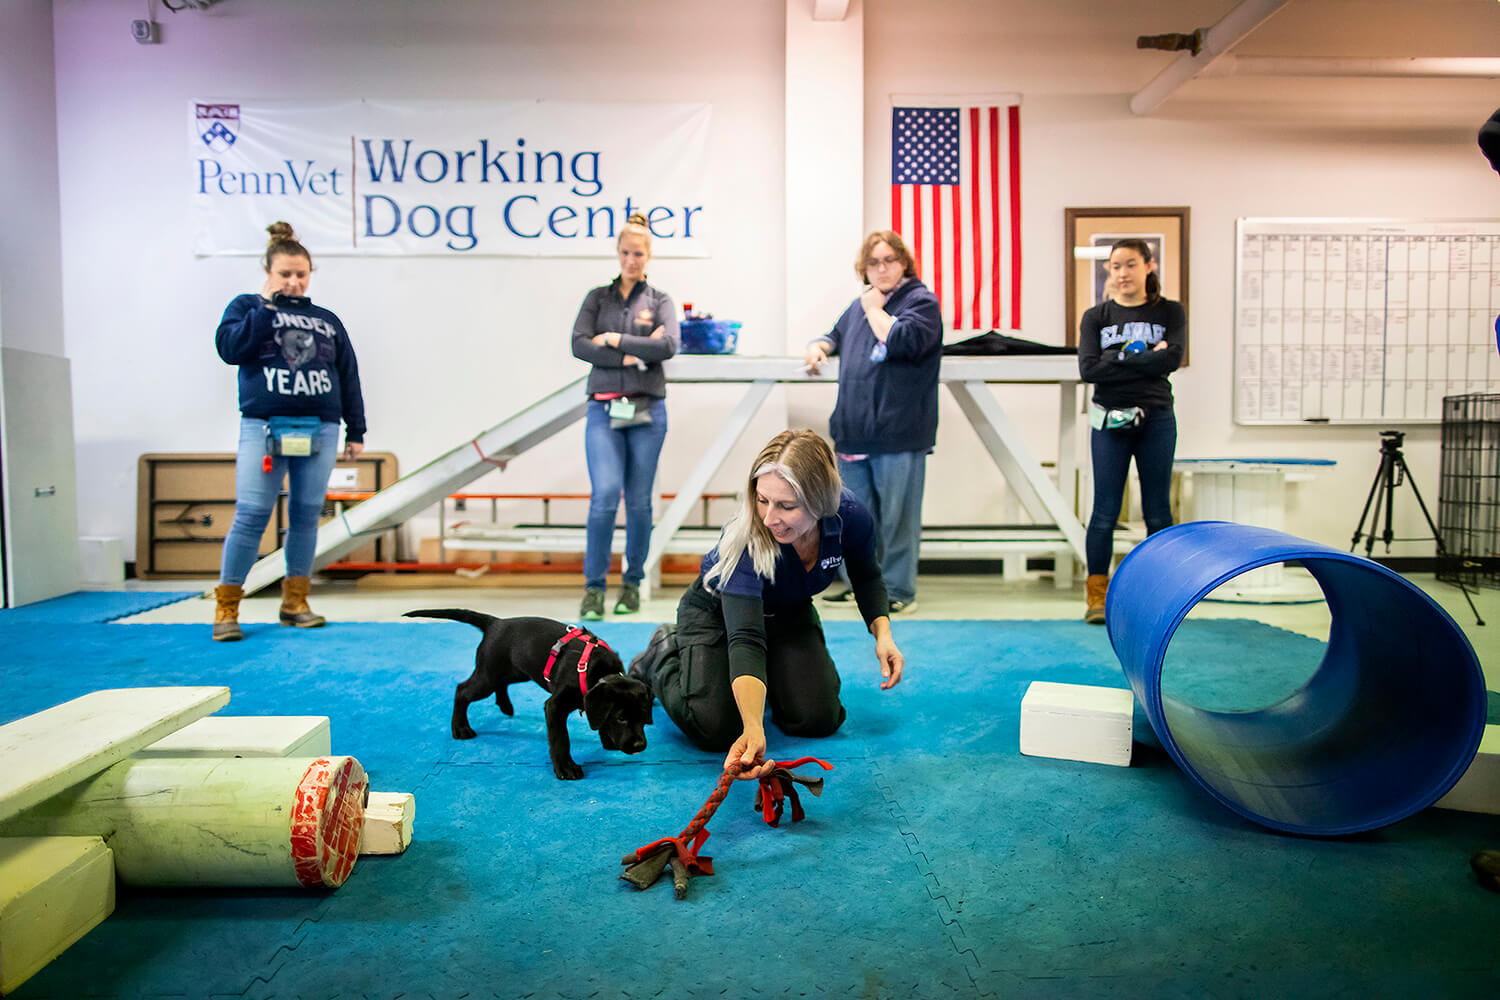 Urban, a three-month-old black Labrador retriever, trains with Danielle Berger at the Penn Vet Working Dog Center. Berger is leading the training for the U litter, composed of Urban and seven of her brothers and sisters, with assistance from interns including (left to right) Charlotte Kronick, Dominique Andrews, Trevor Vidas, and Tesa Stone.